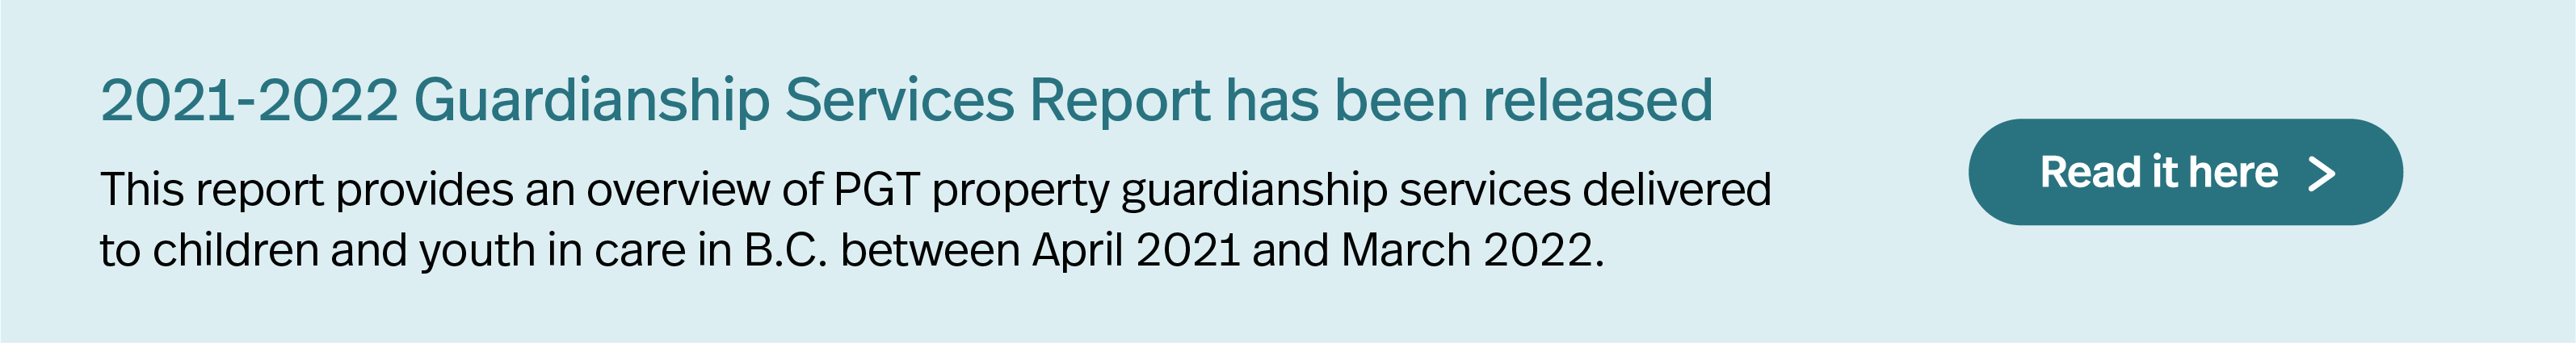 2021-2022 Guardianship Report release banner. Read it here.